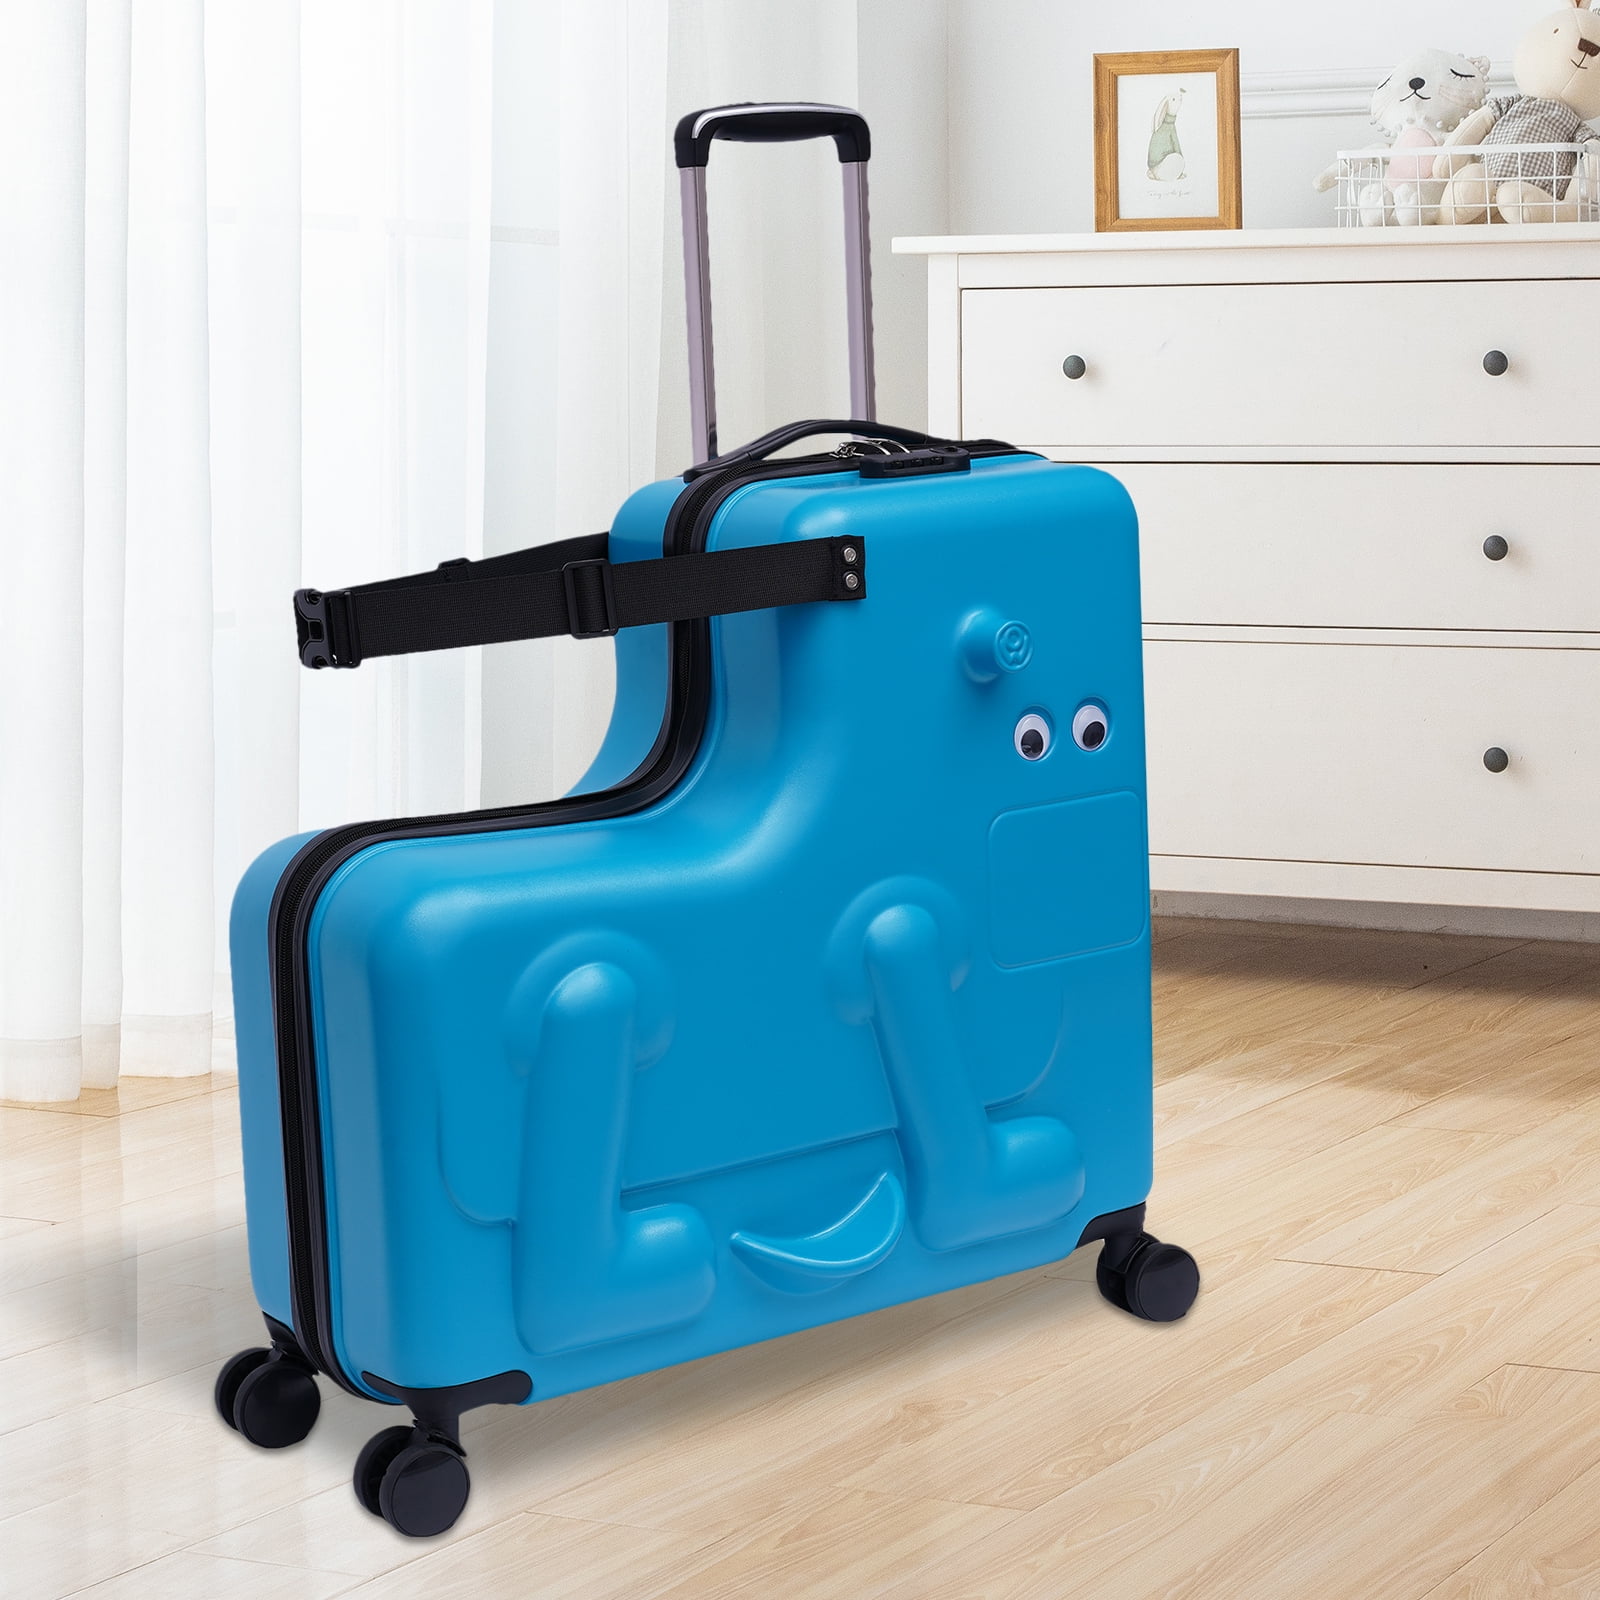 Rideable Trolley Case 20 Inch Children's Ride On Trolley Luggage Kid‘s Luggage Trolley Wheels Boys Girls Scooter Suitcase Children Travel Rideable Funny Suitcase Maximum Load 66 lbs With Lock 